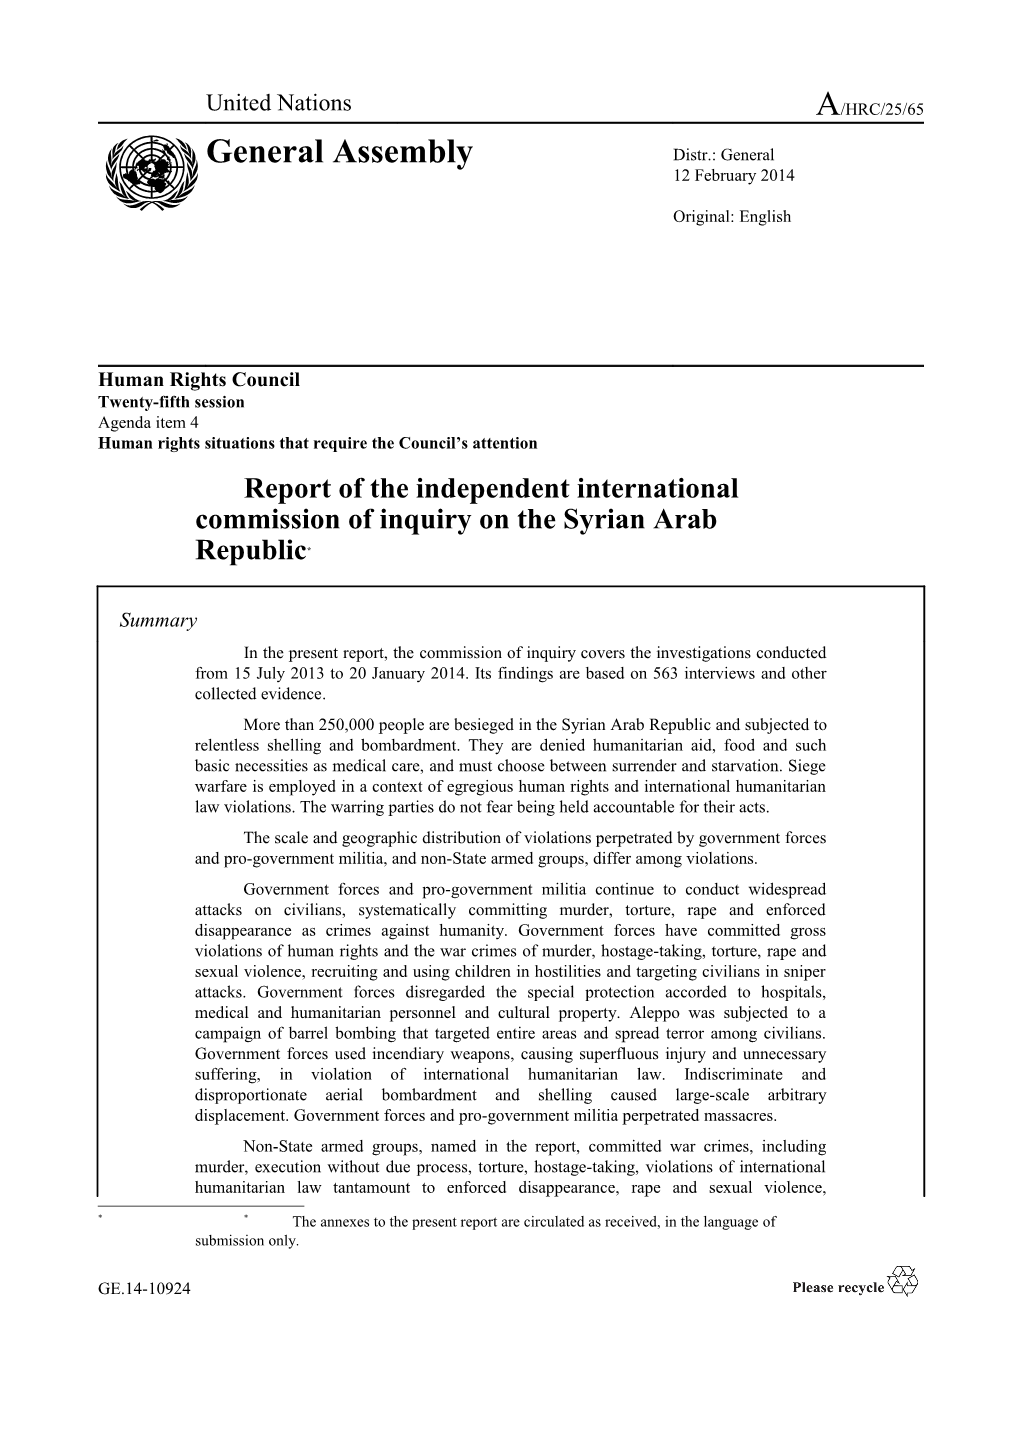 Updated Report on the Work of the Commission of Inquiry on the Situation in the Syrian